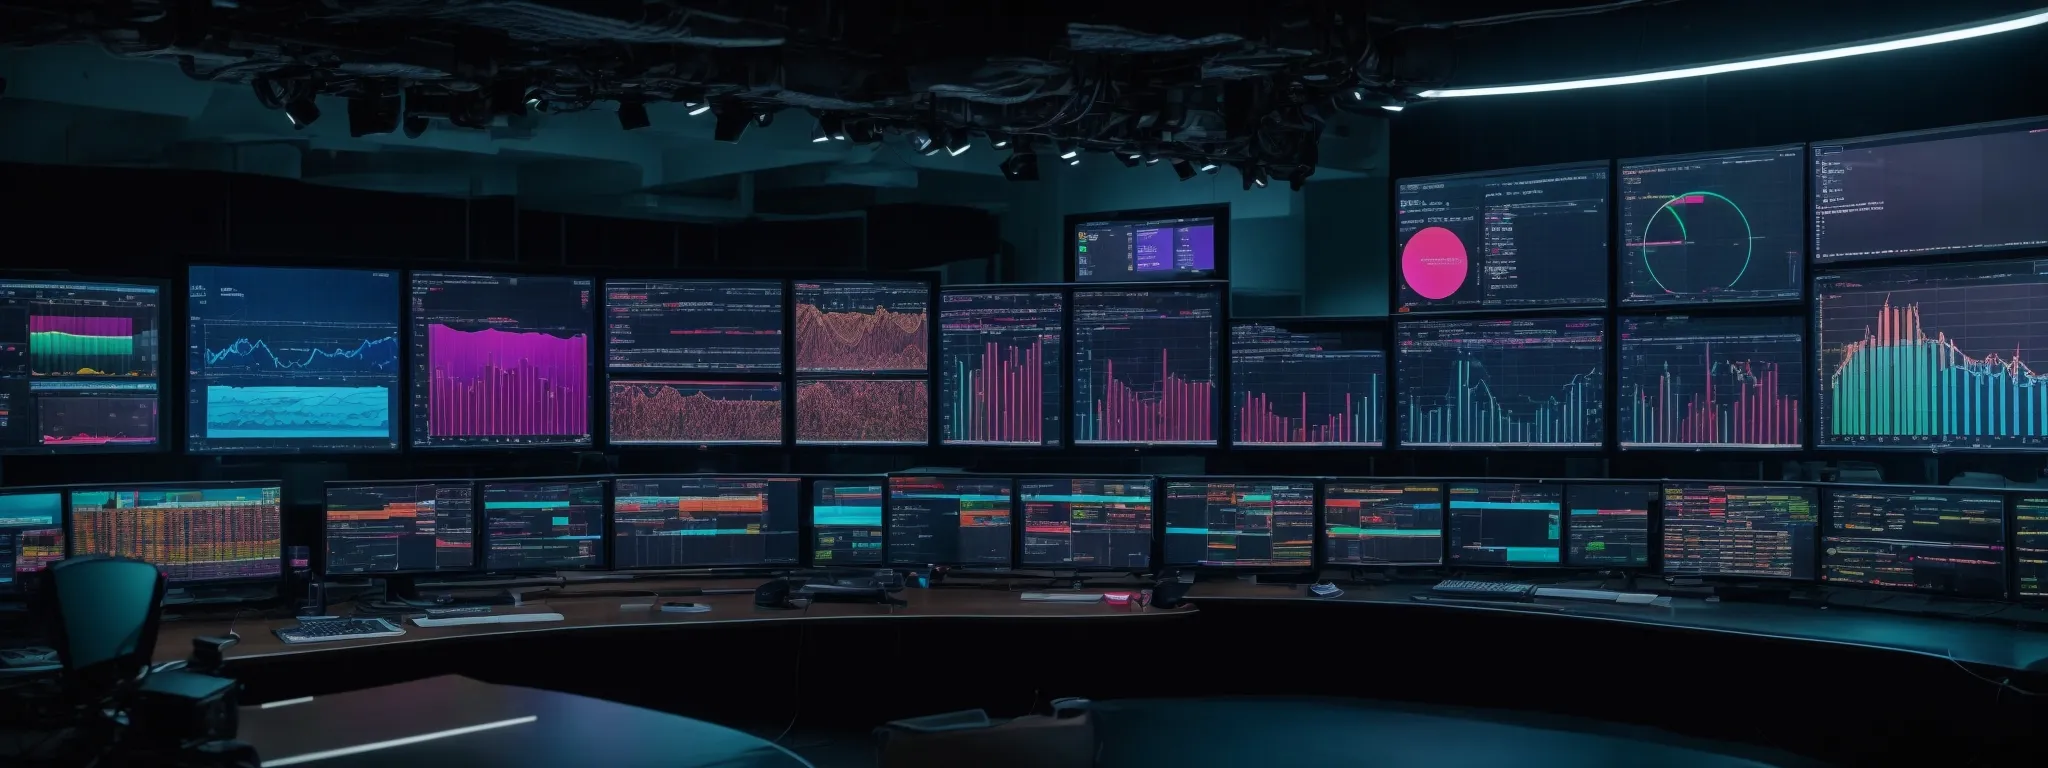 a high-tech control room with large screens displaying colorful analytics and graphs related to search engine performance.